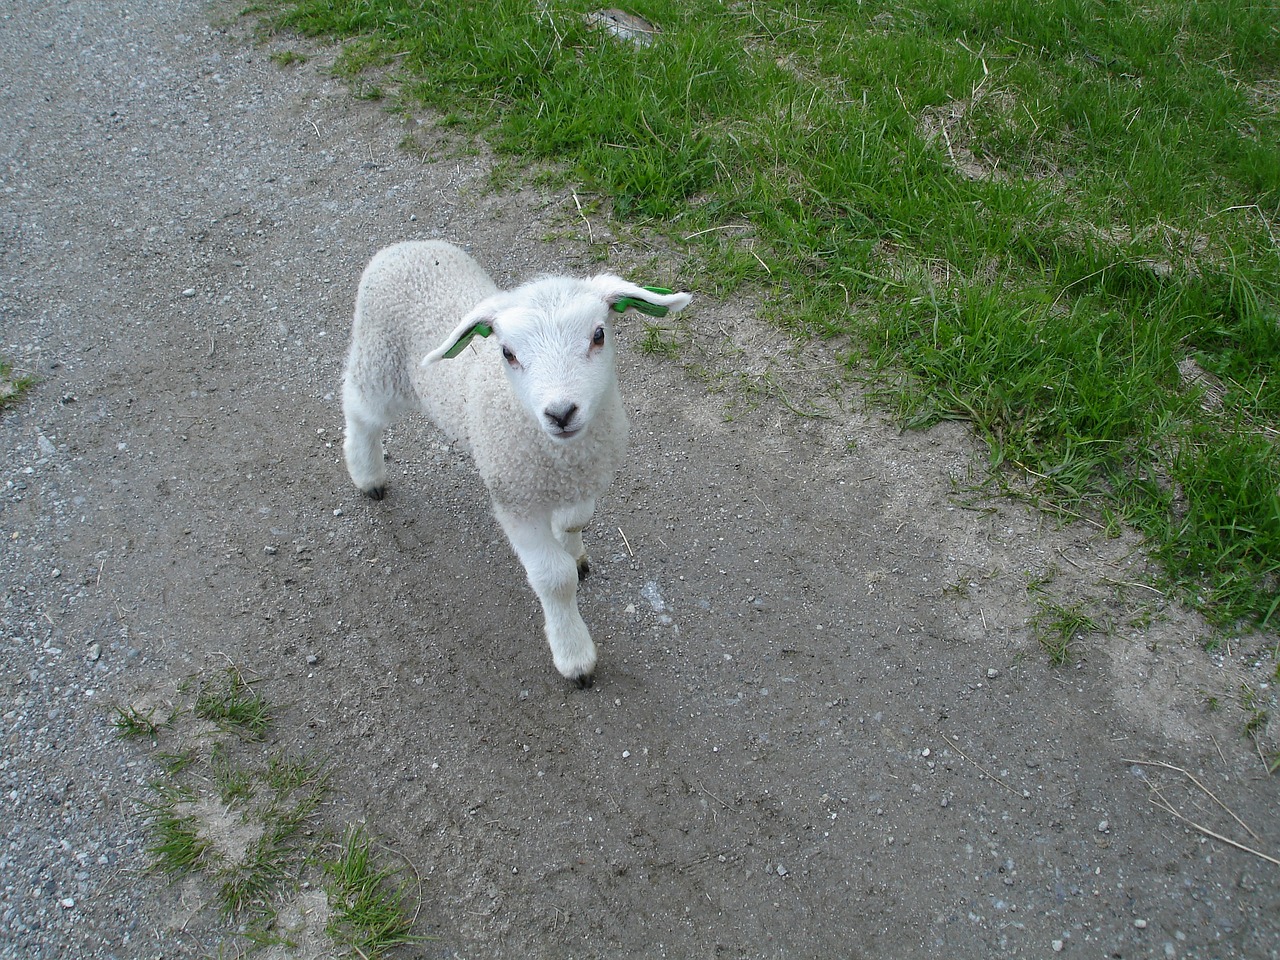 a small white sheep standing on top of a dirt road, by Samuel Scott, flickr, happening, running freely, on the sidewalk, ffffound, just a cute little thing